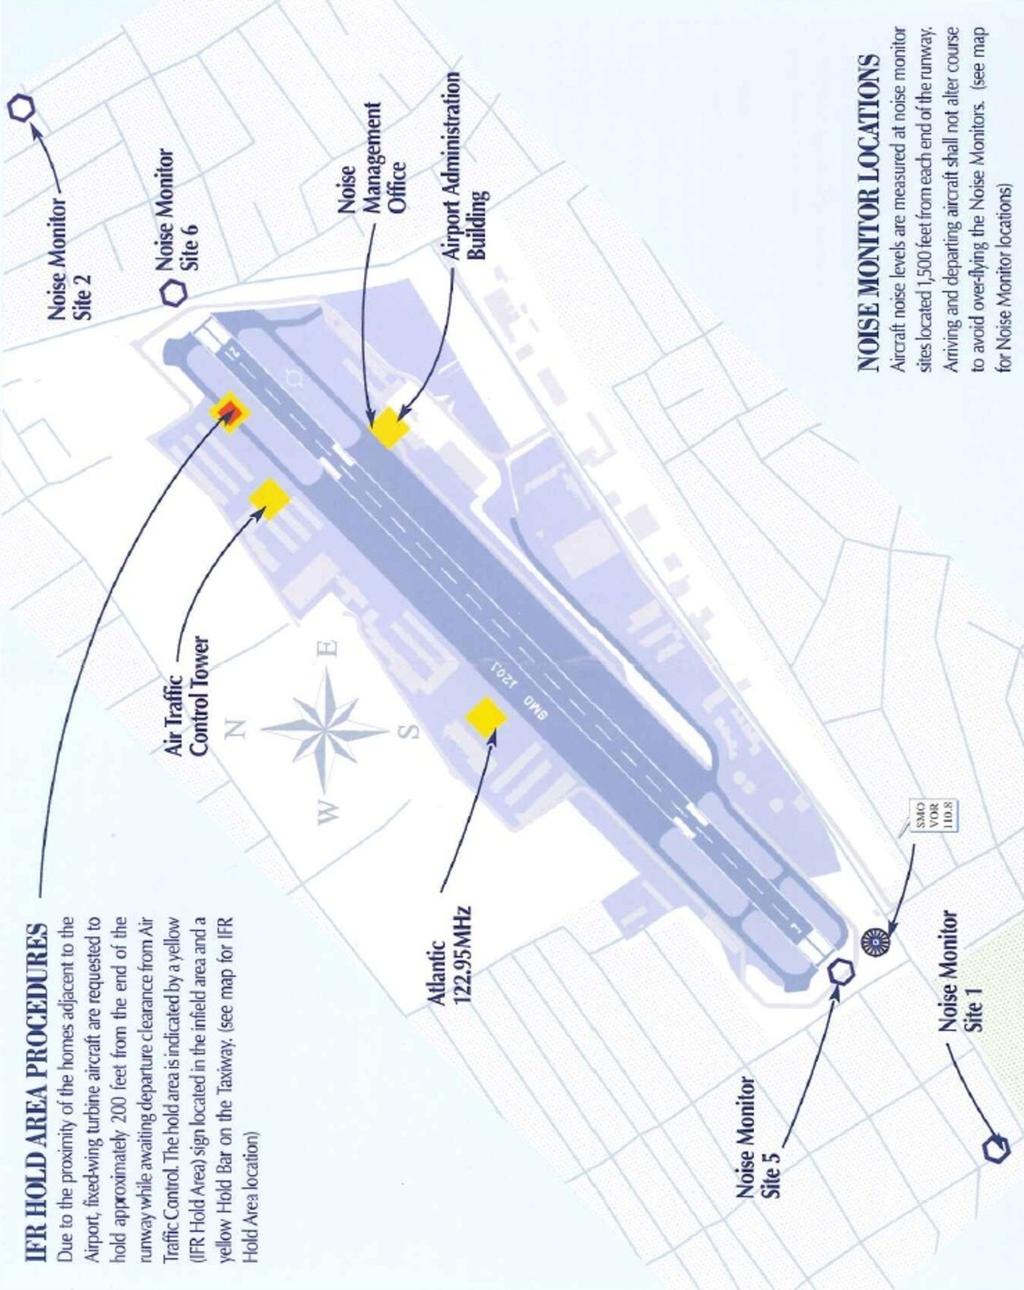 Diagram #1: Airport Diagram with Monitors and Turbine Aircraft Hold